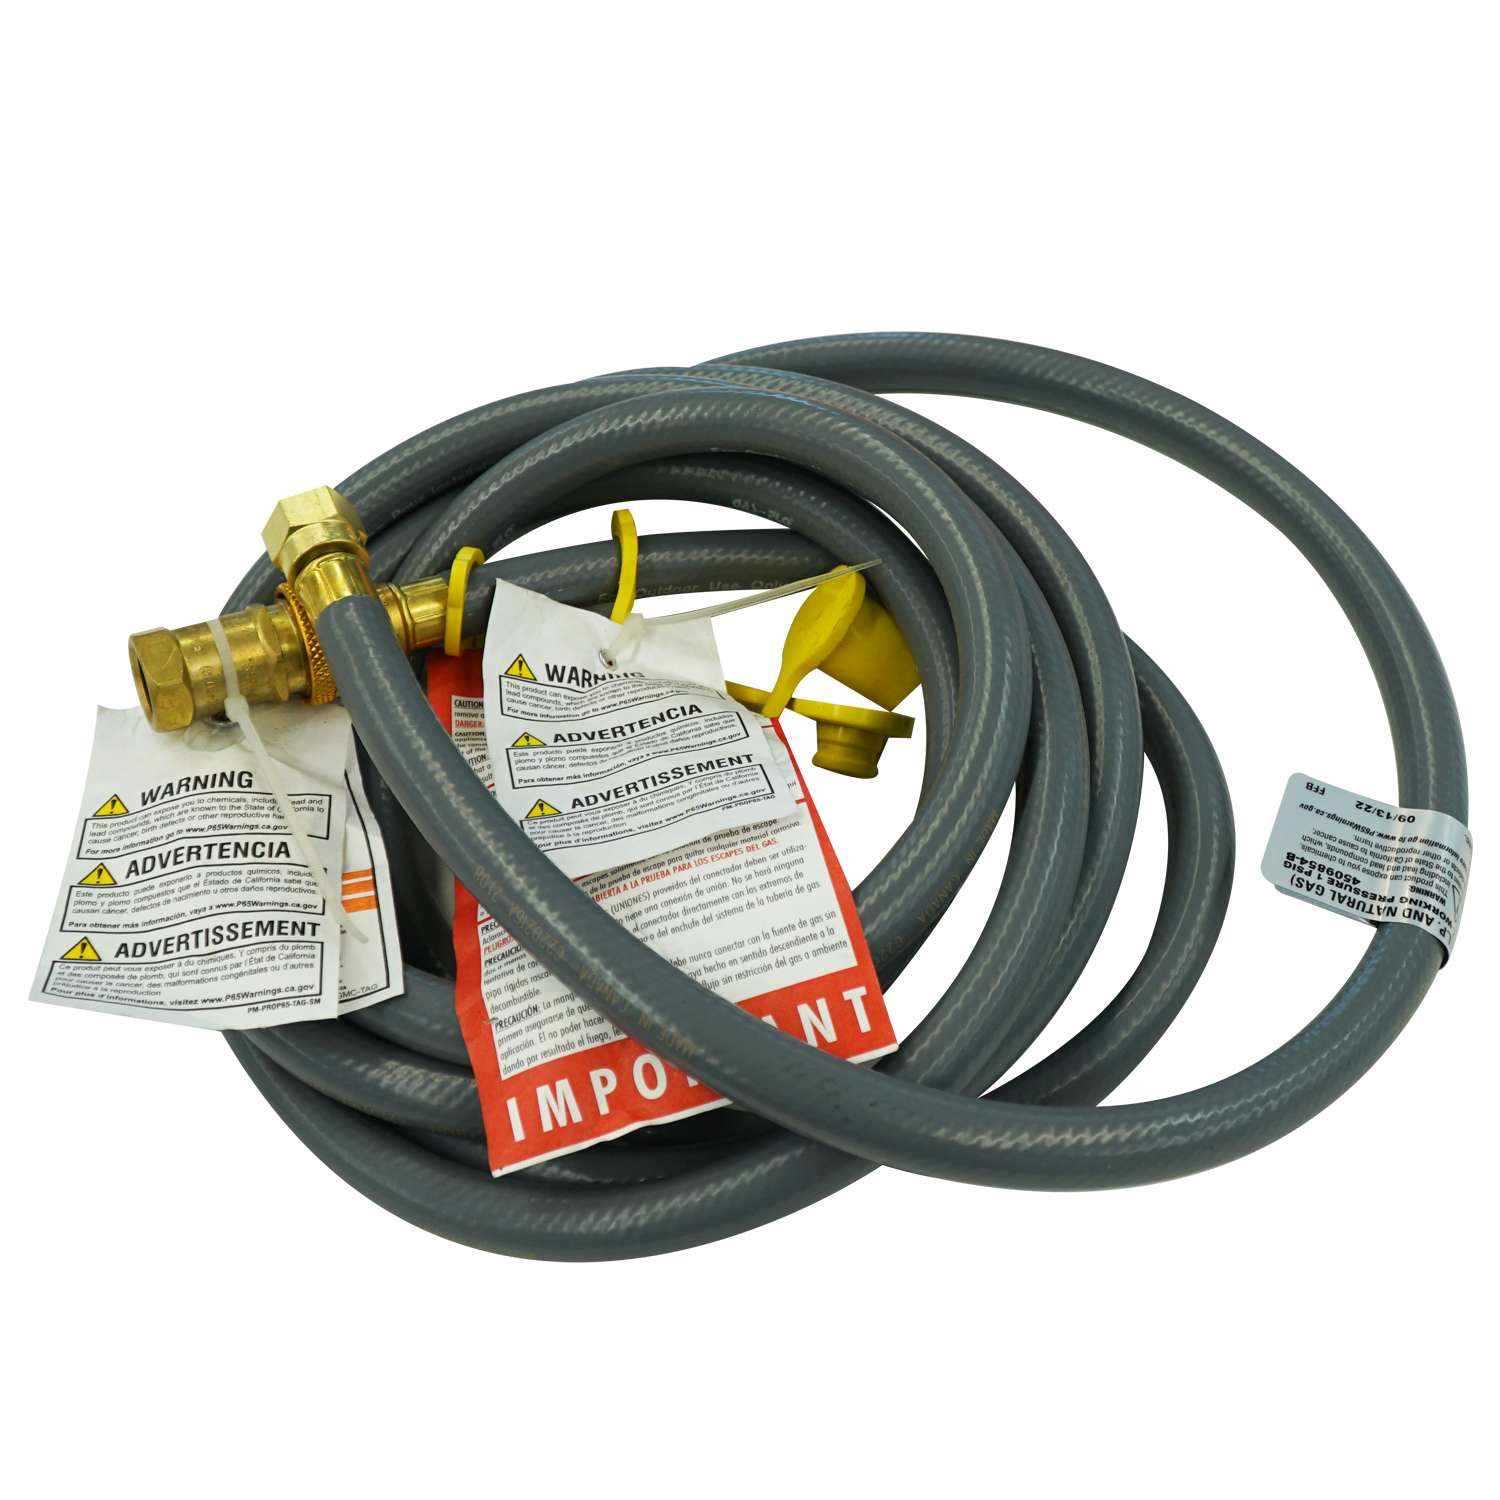 Broilmaster Quick disconnect Hose Kit 12FT